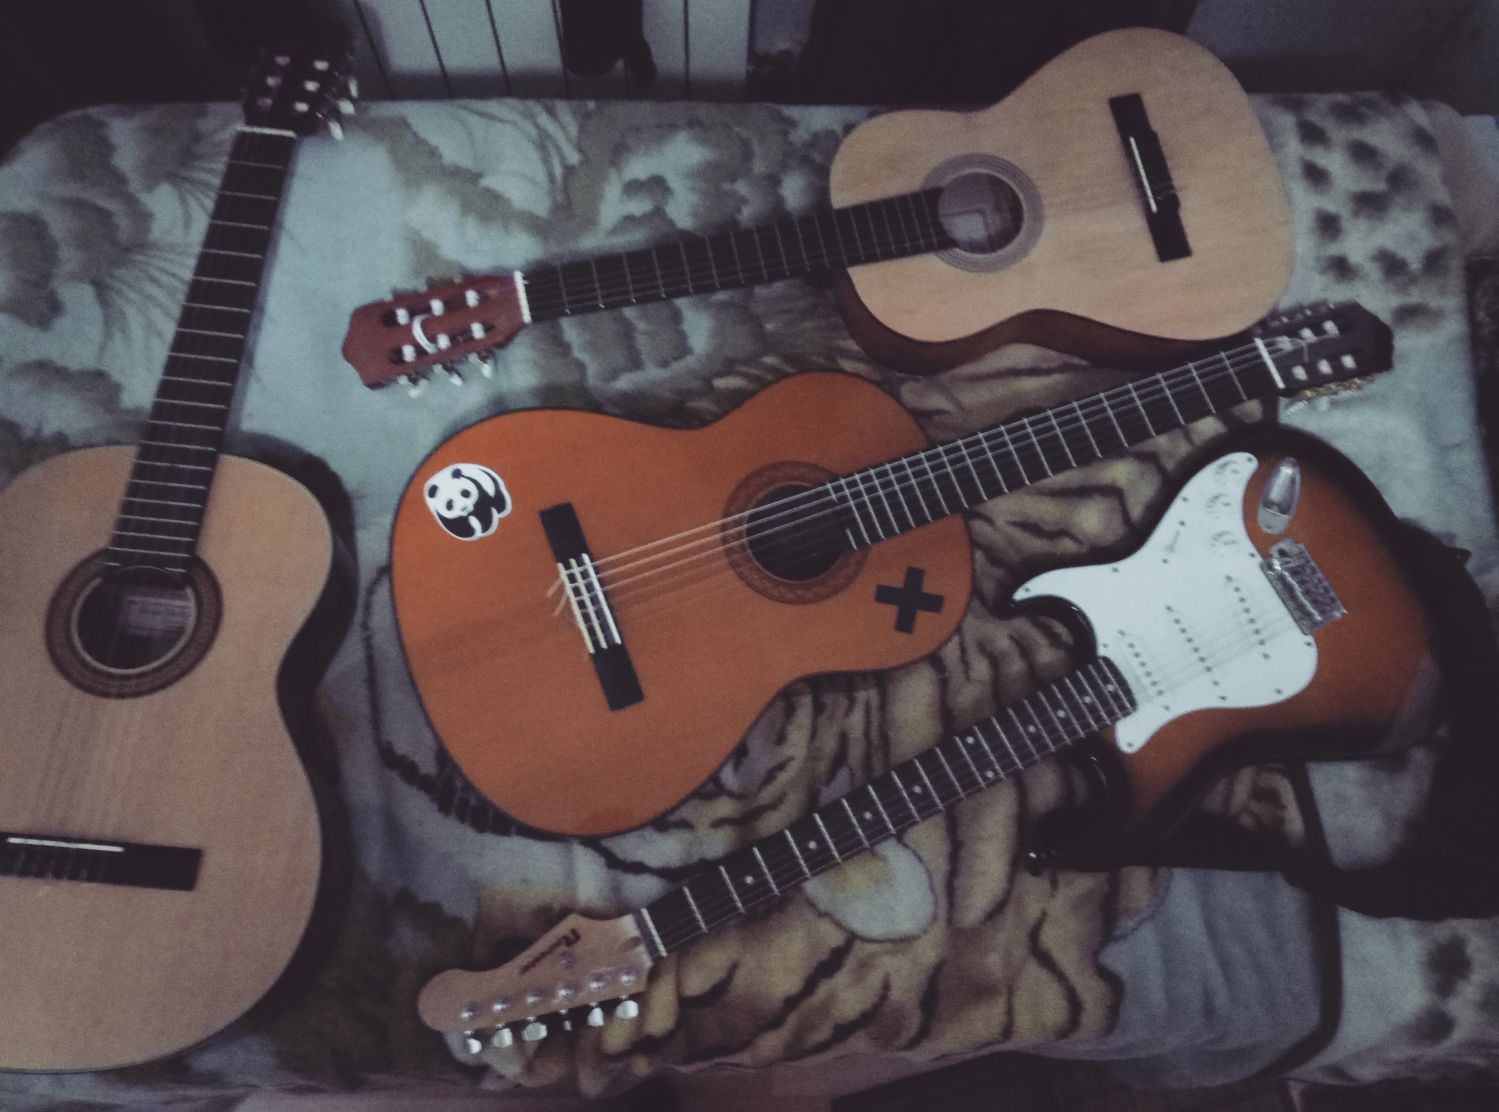 My Guitar collection